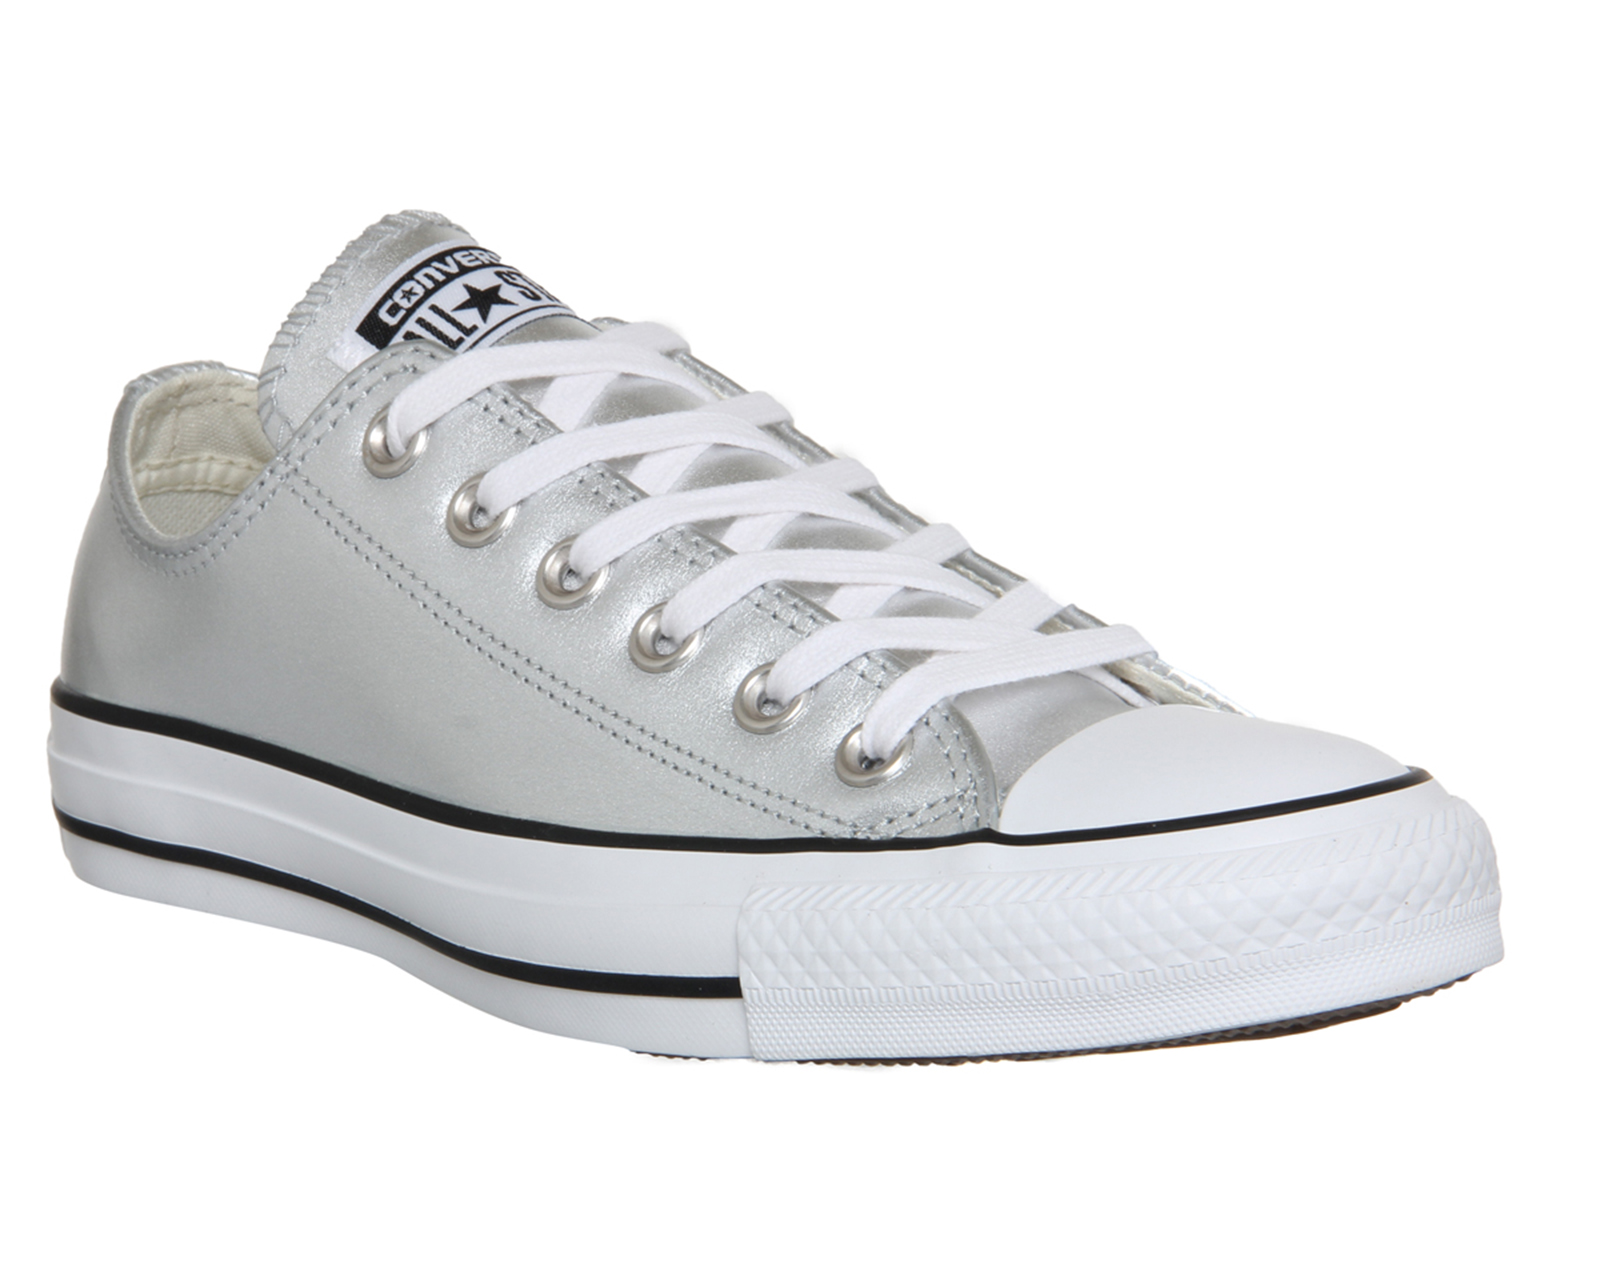 silver metallic converse shoes Online Shopping for Women, Men, Kids Fashion  & Lifestyle|Free Delivery & Returns! -